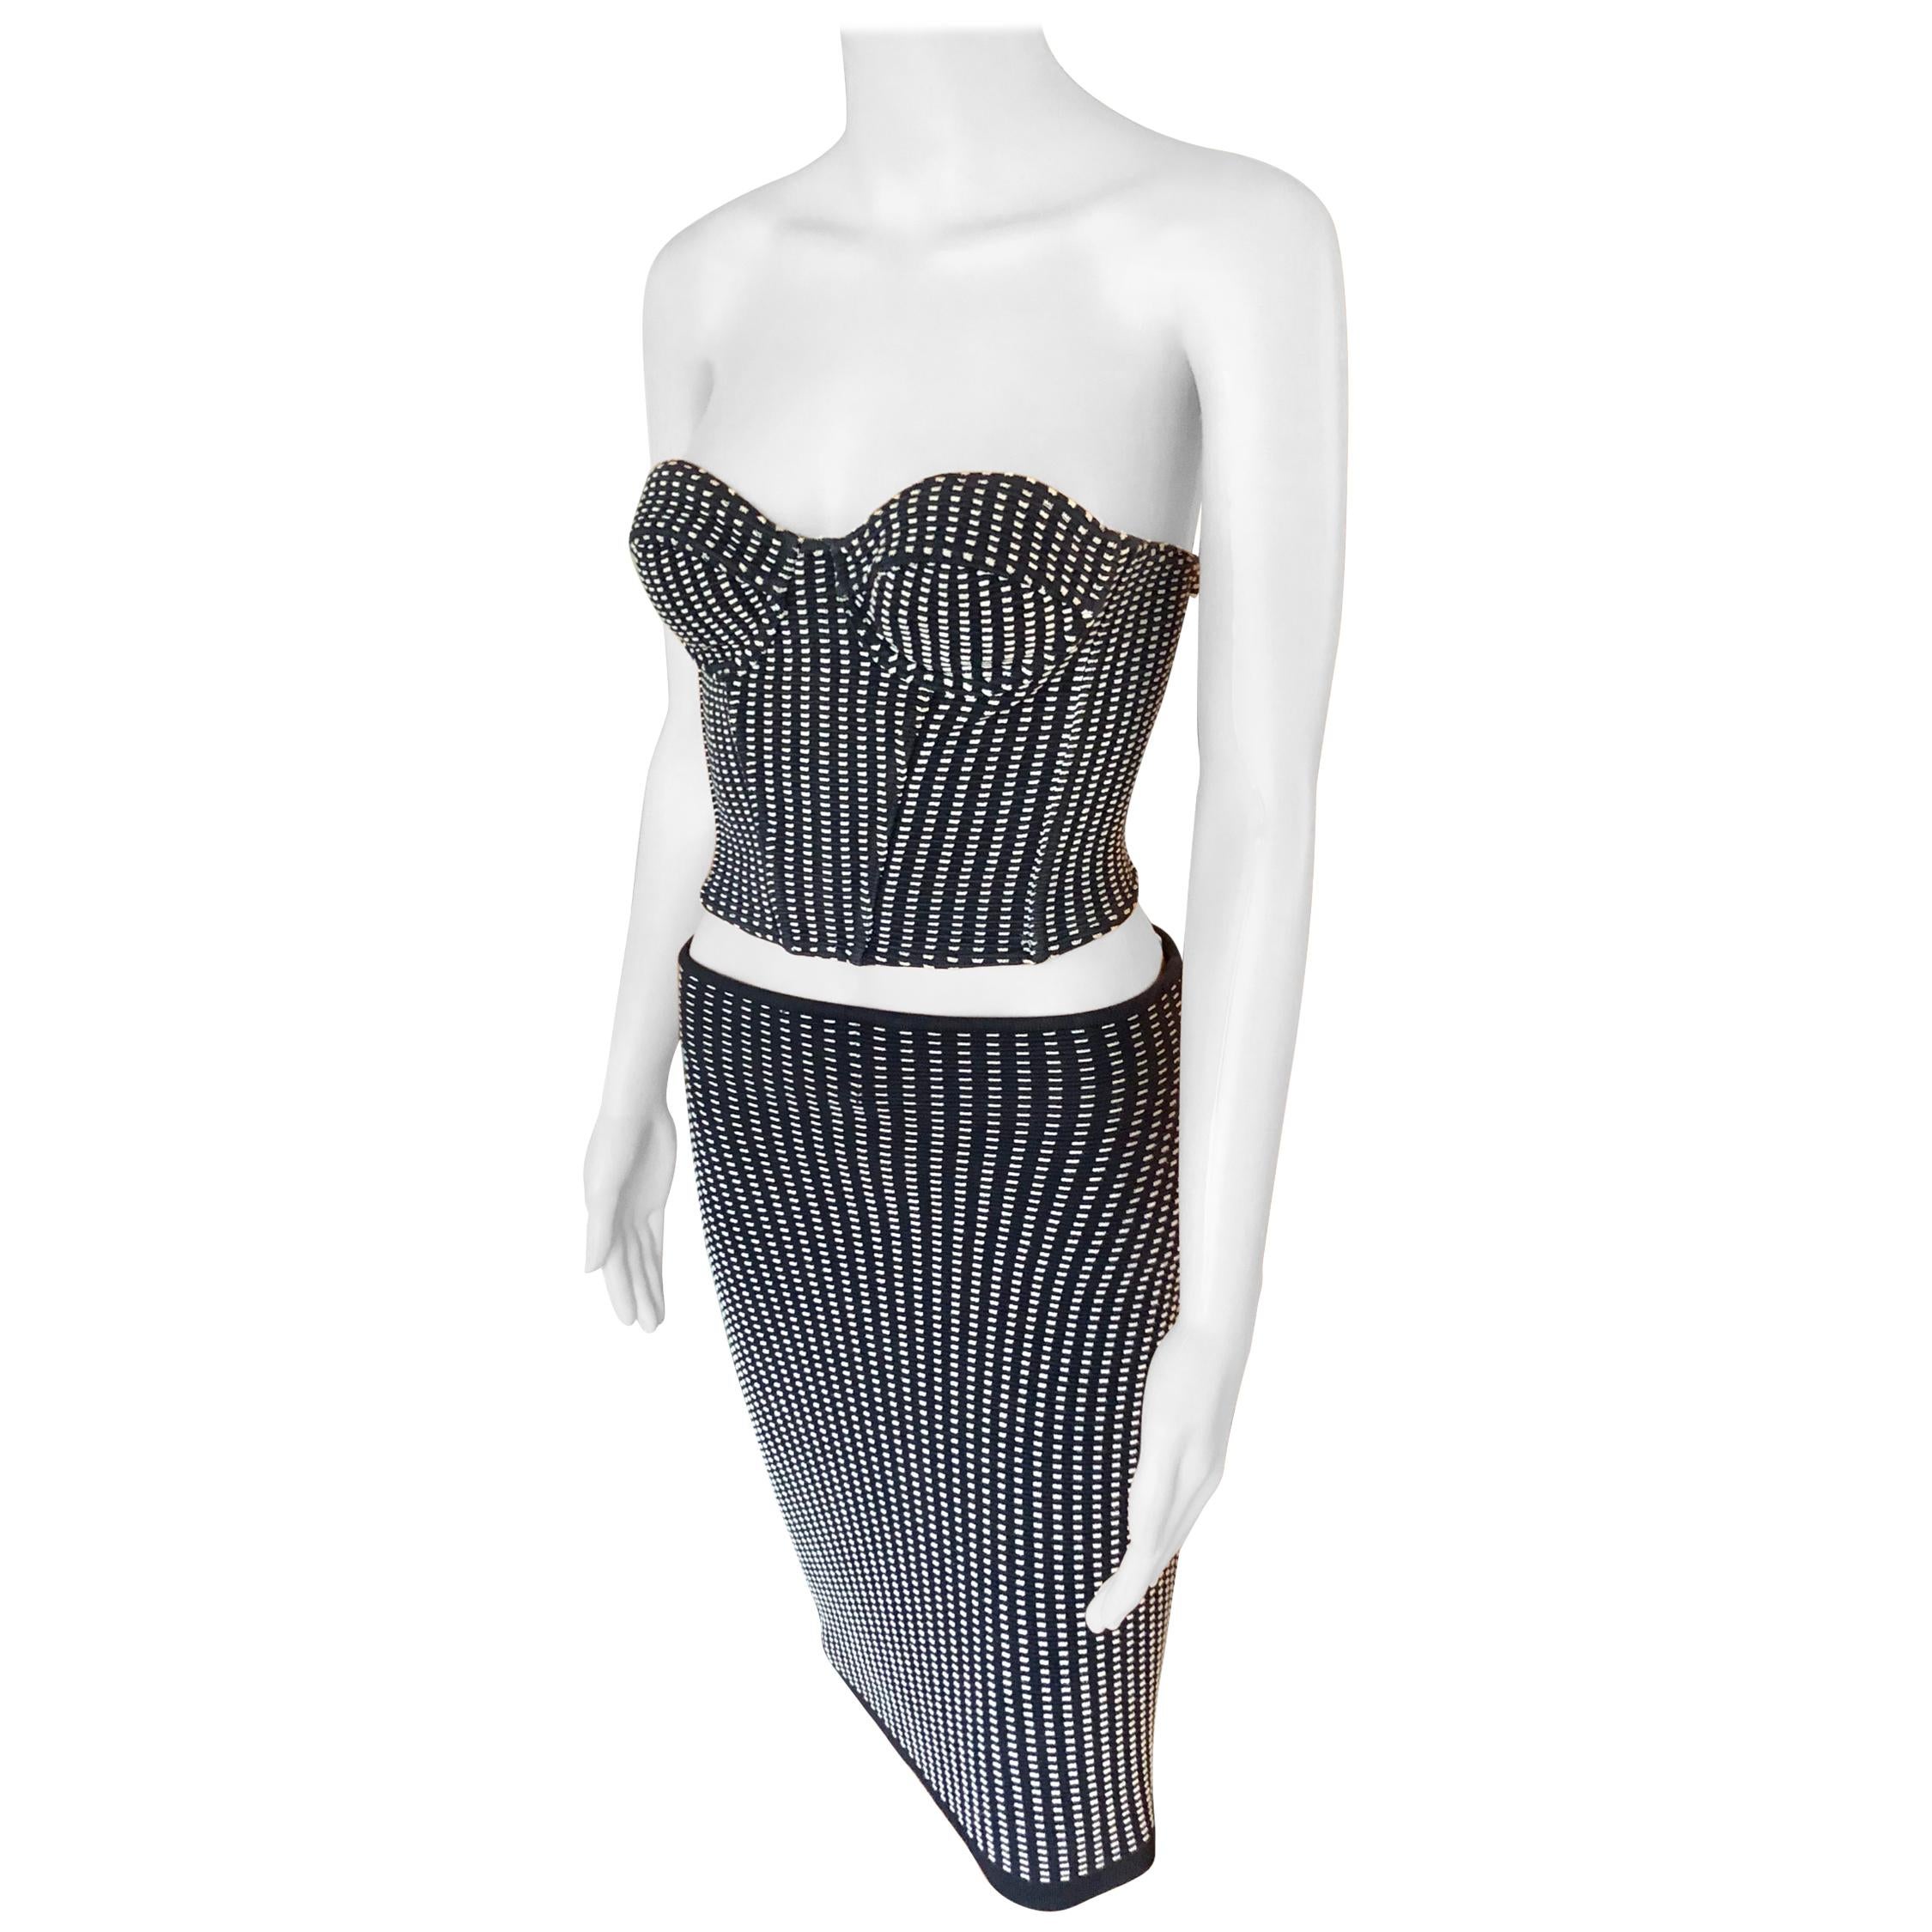 Azzedine Alaia S/S 1991 Vintage Skirt and Bustier Crop Top 2 Piece Set 